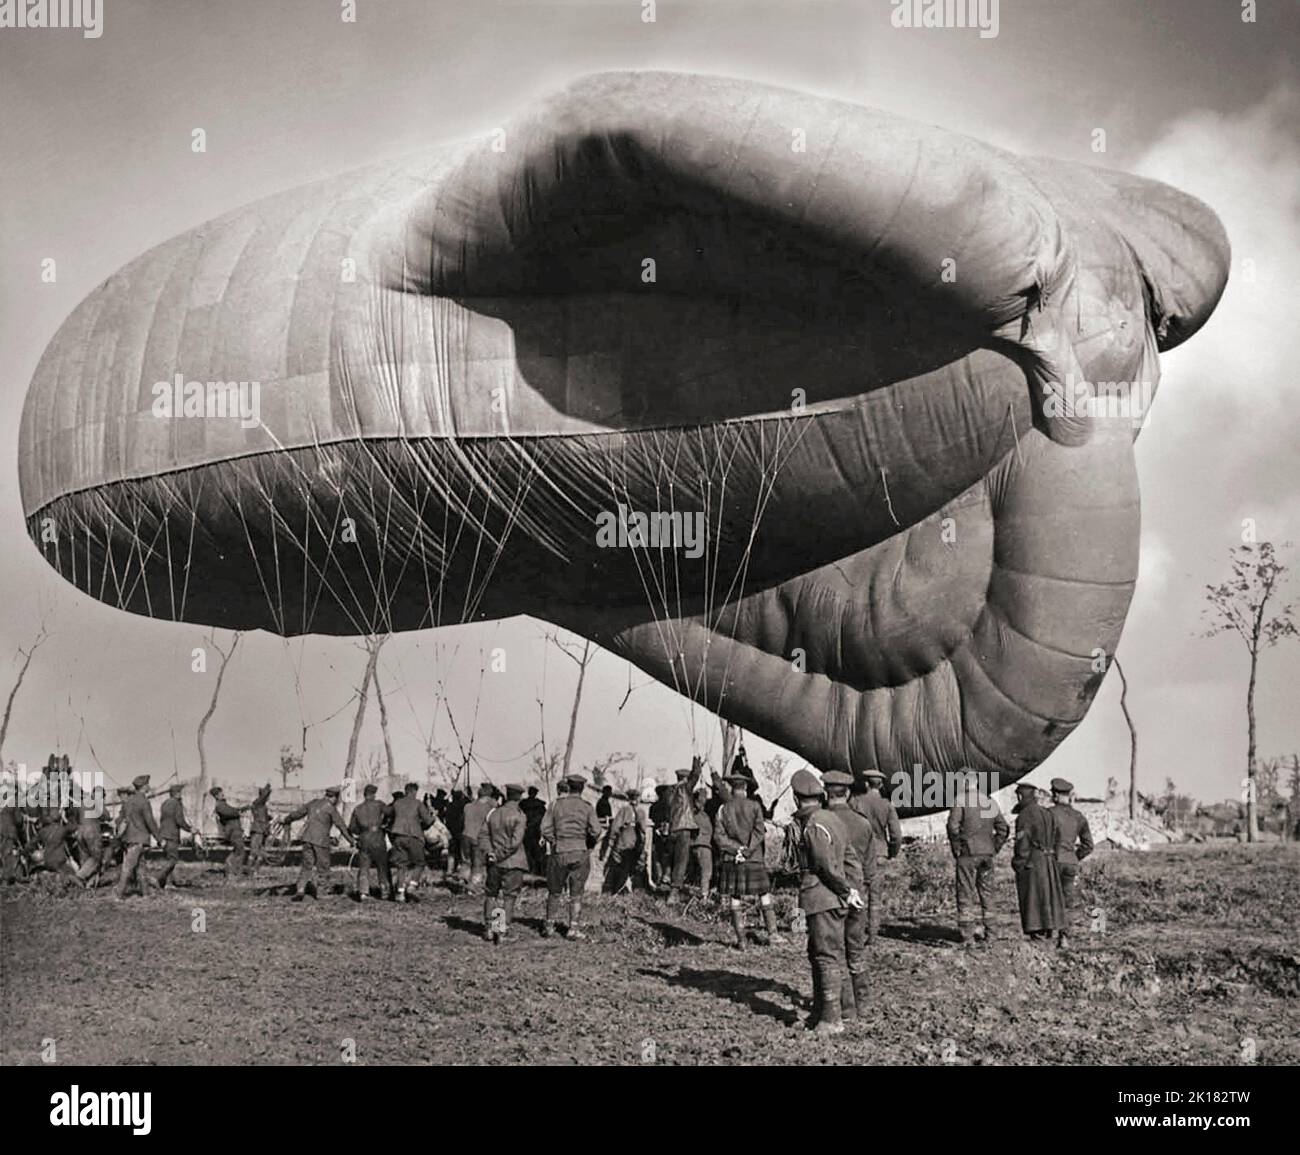 A returning British observation balloon. A small army of men, dwarfed by the balloon, are controlling its descent with a multitude of ropes. They were employed as an aerial platform for intelligence gathering and artillery spotting. The balloons were filled with hydrogen gas, whose flammable nature led to the destruction of hundreds of balloons on both sides. Typically, balloons were tethered to a steel cable attached to a winch that reeled the gasbag to its desired height (usually 1,000-1,500 metres) and retrieved it at the end of an observation session. Stock Photo